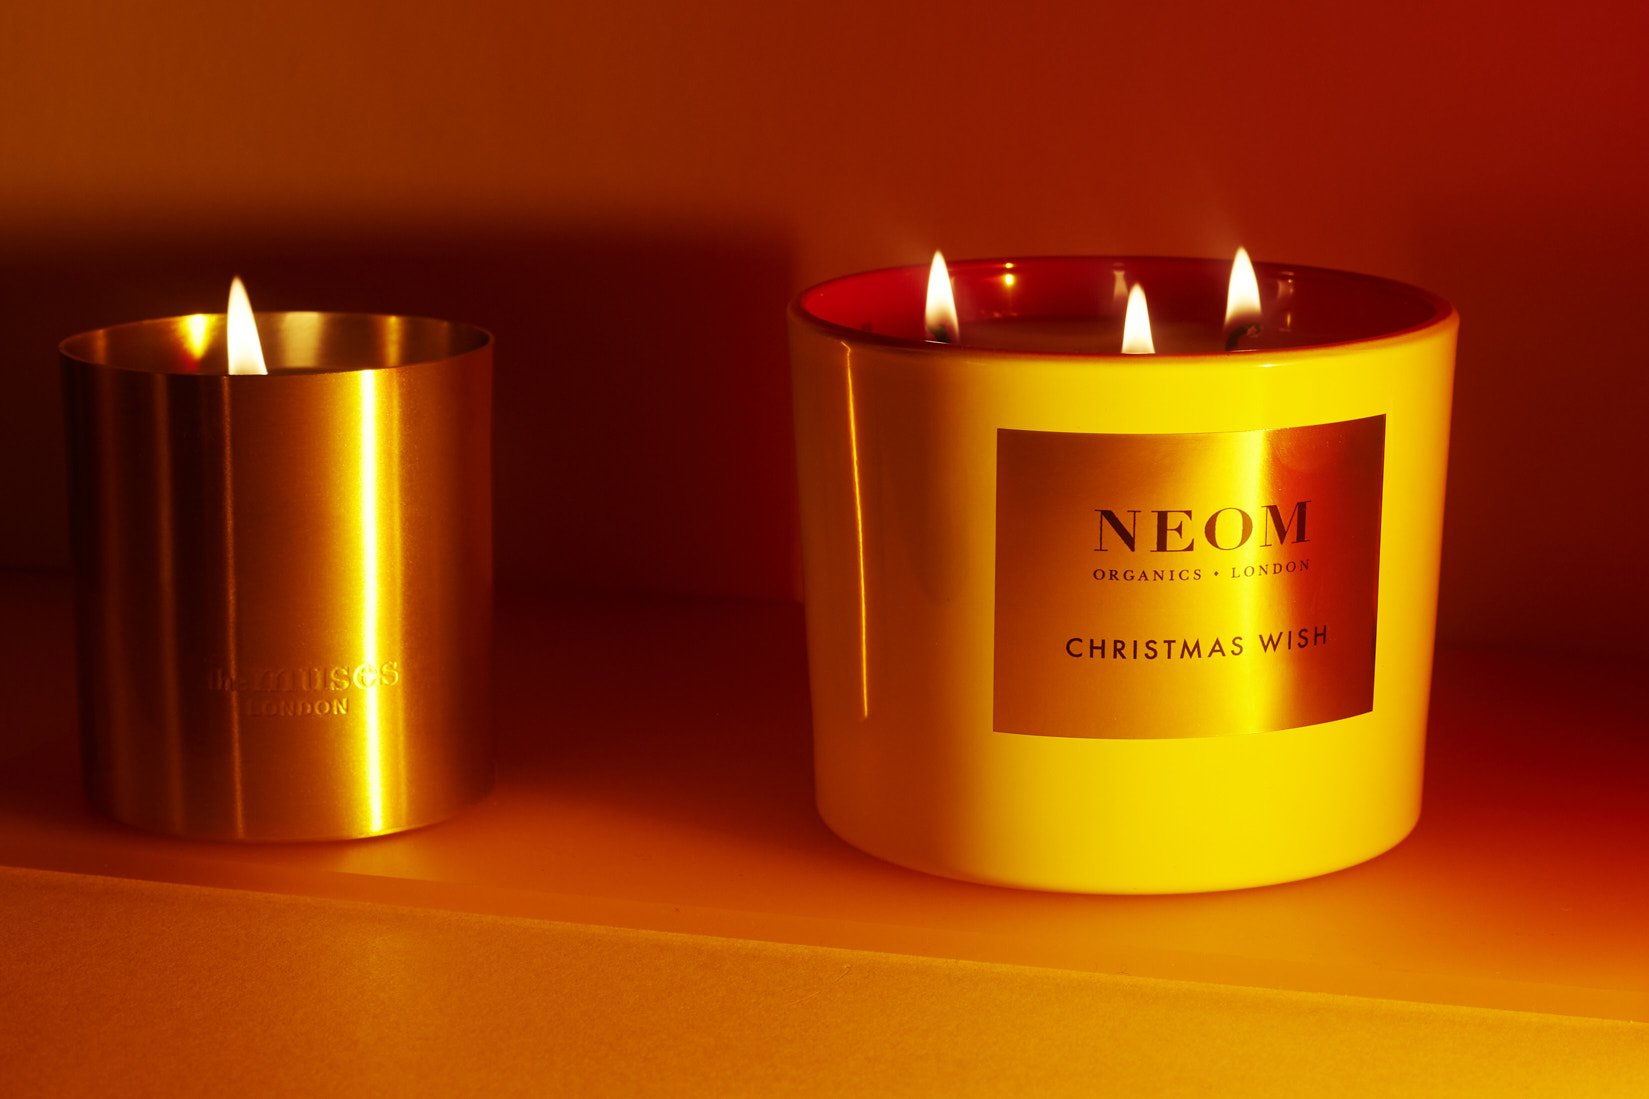  THE MUSES  Kickback Scented Candle  £48  NEOM  Christmas Wish 3 Wick Candle  £48   